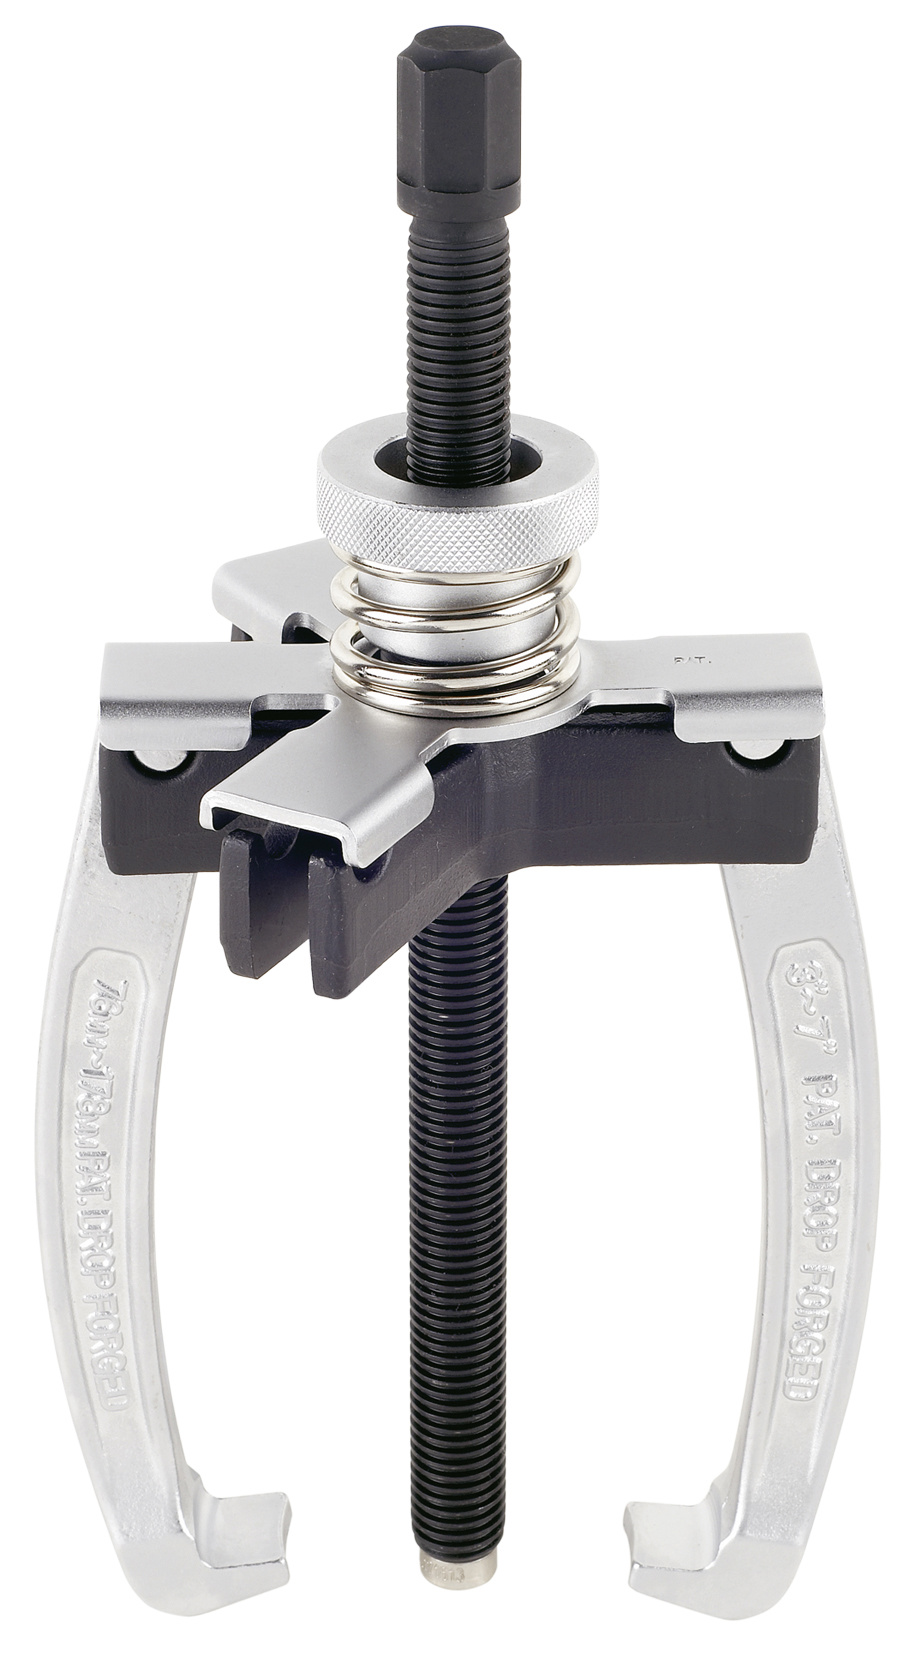 2 + 3 jaws gear puller 102 mm